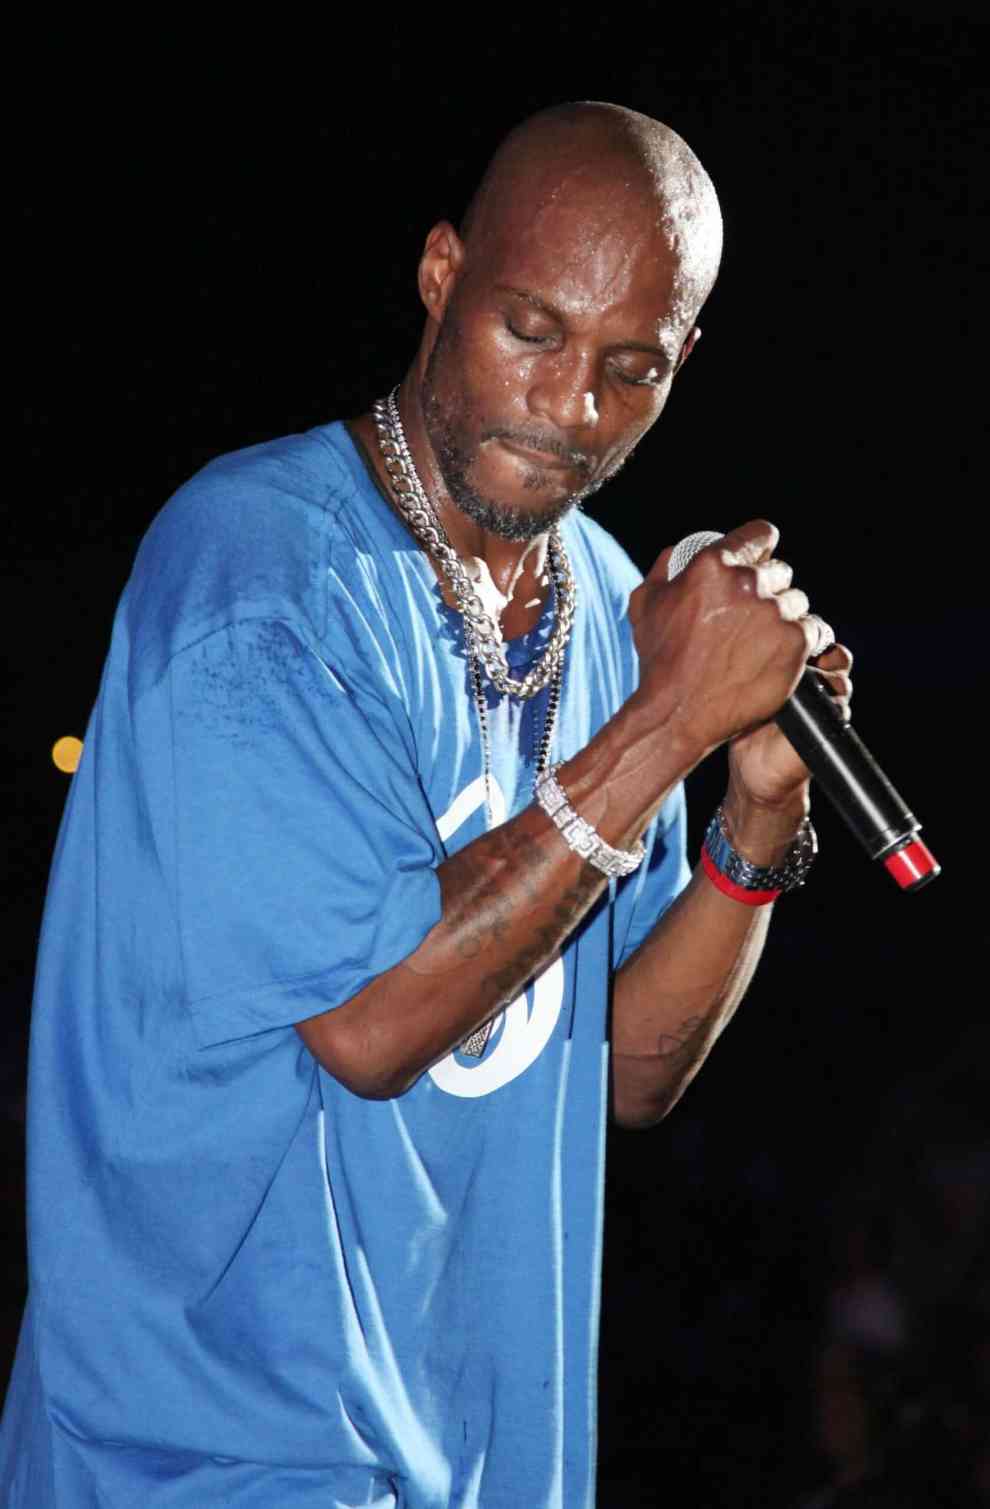 DMX performs during 2012 Rock The Bells